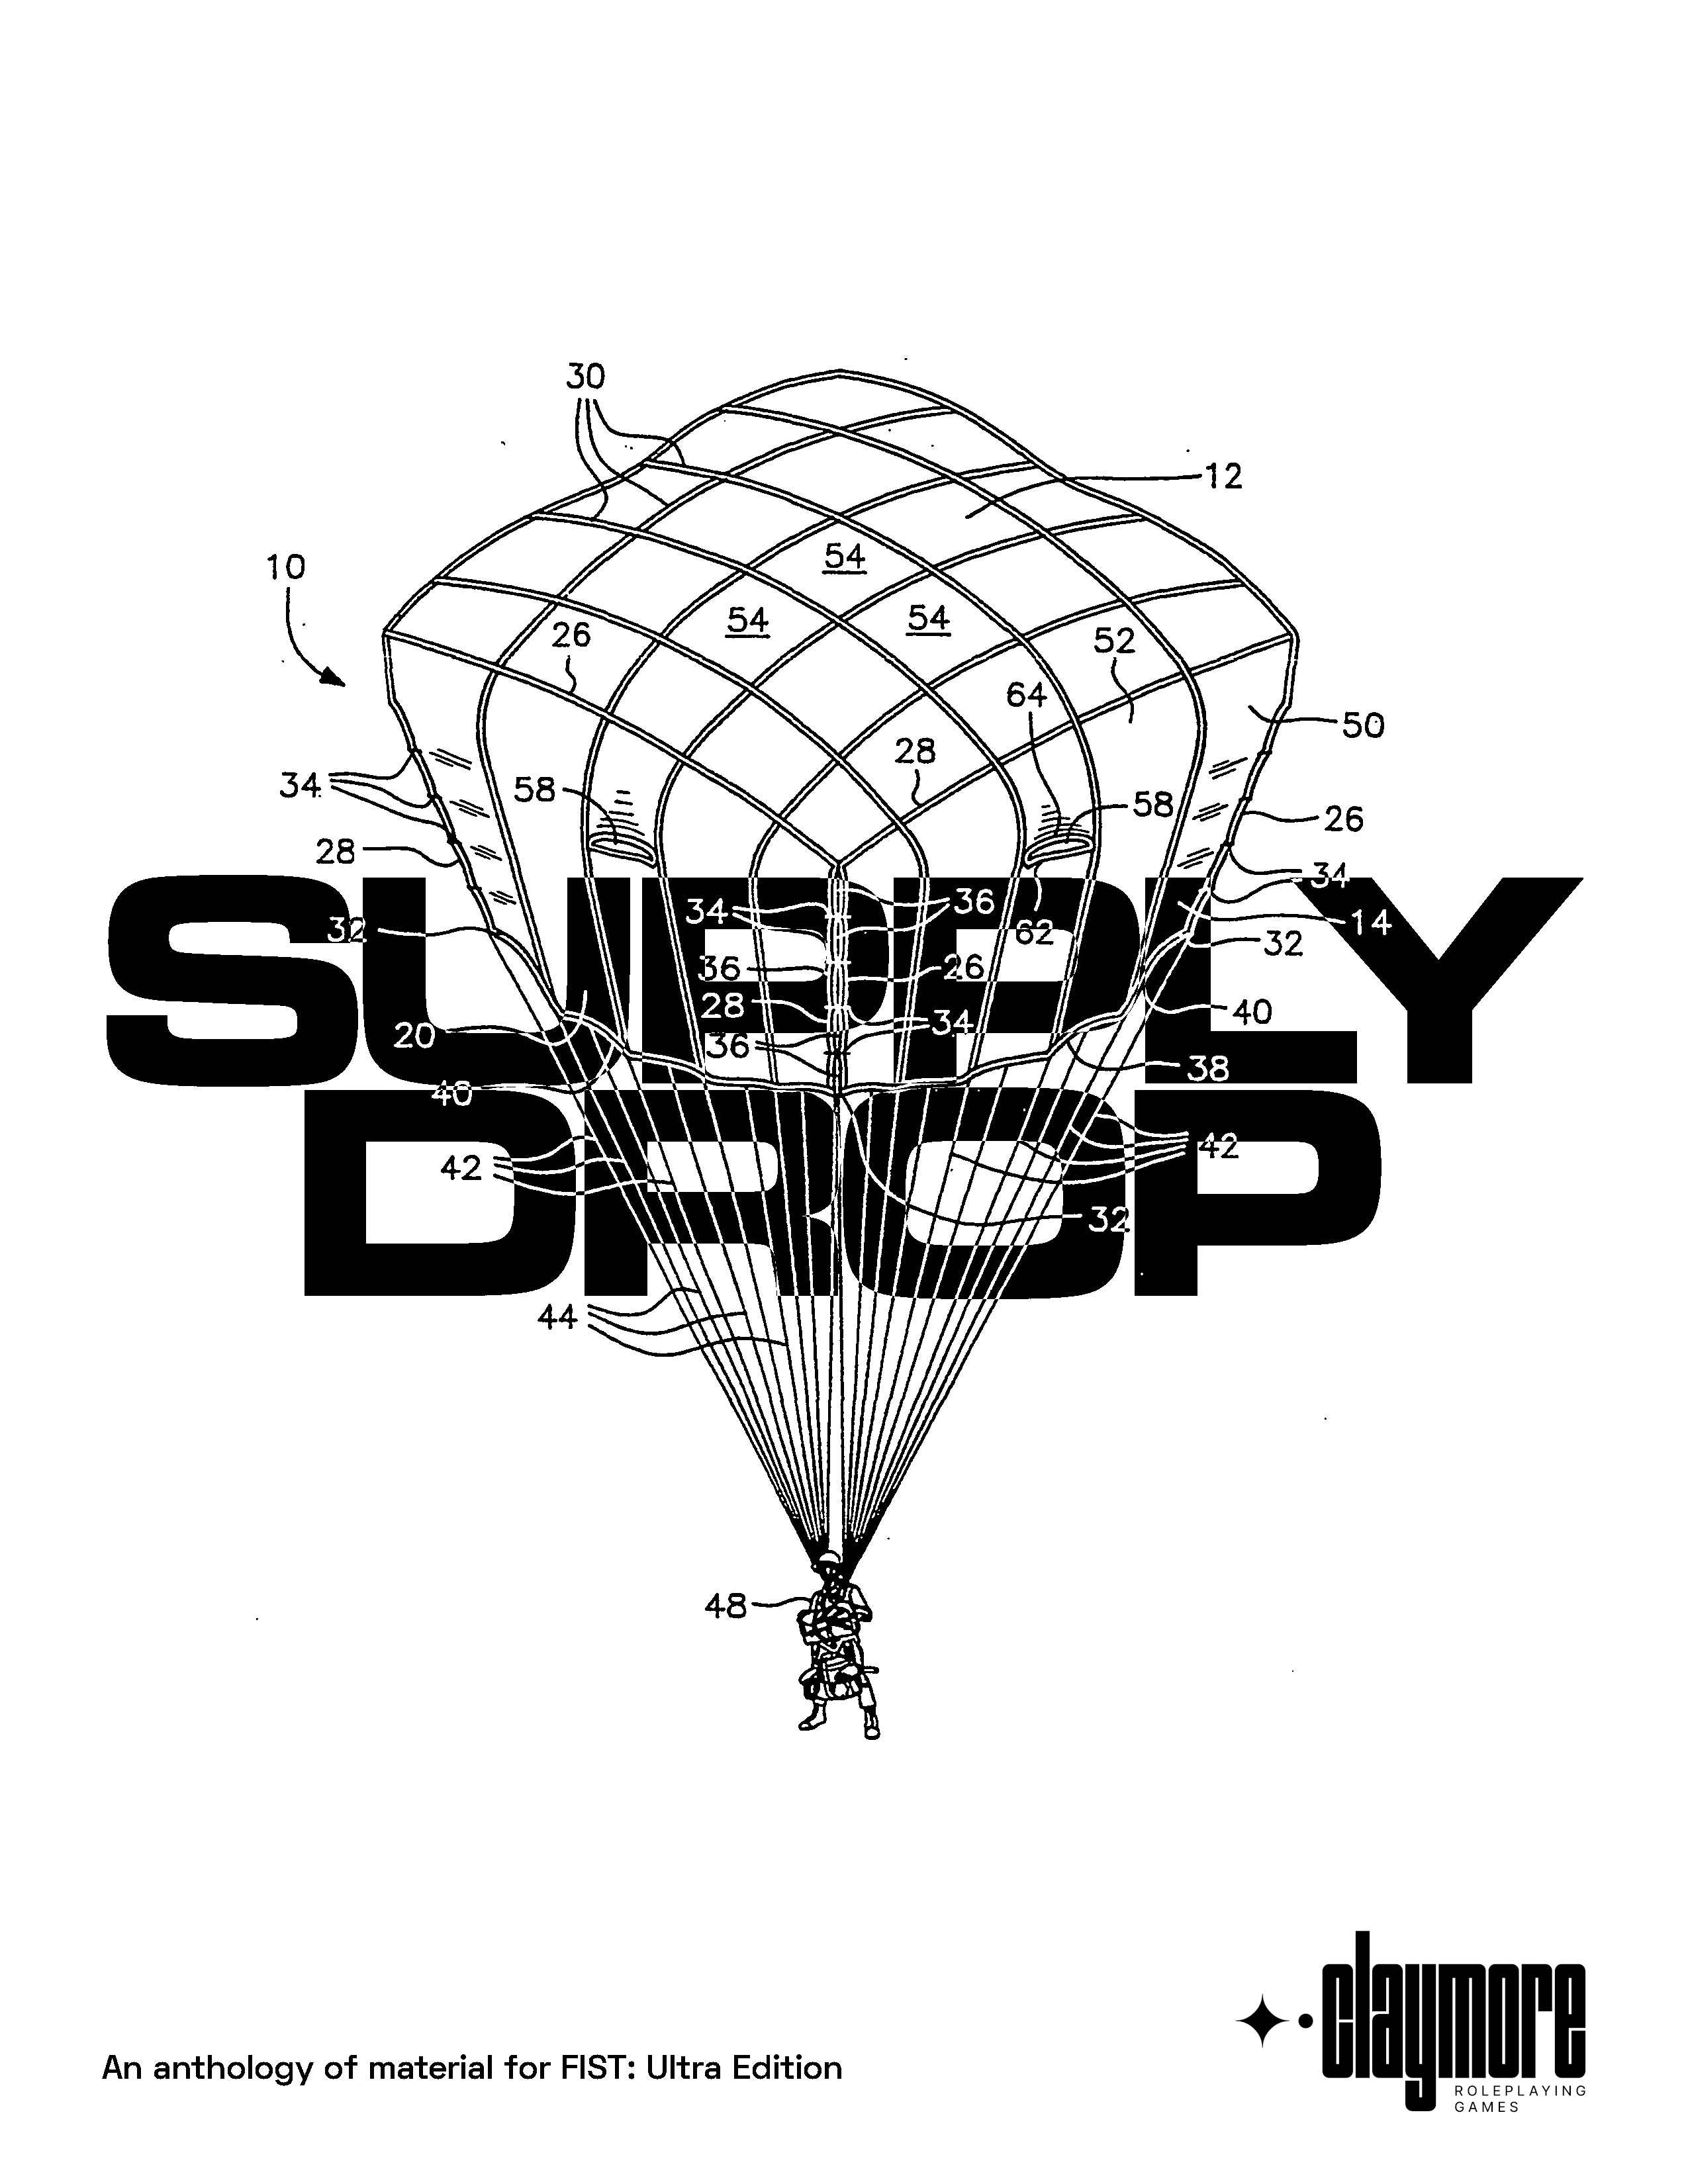 SUPPLY DROP cover, black on white, in the FIST font, with a parachute schematic overlaid. Additional text says, An anthology of material for FIST: Ultra Edition